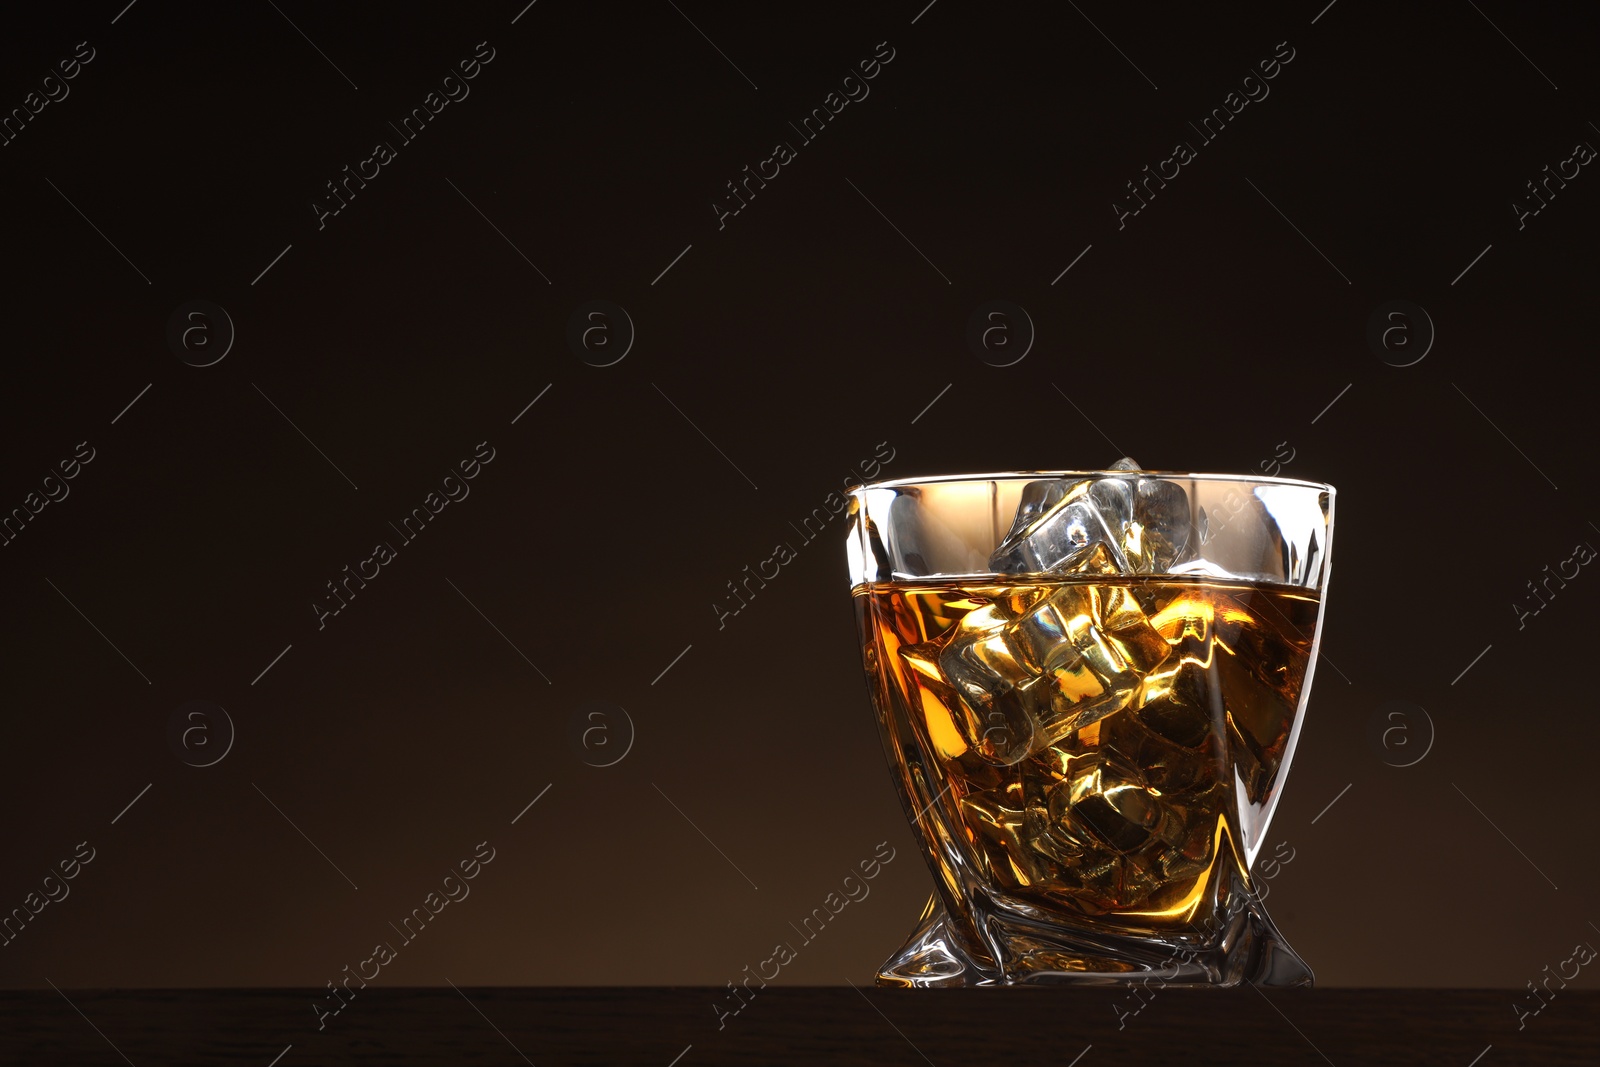 Photo of Whiskey with ice cubes in glass on table against brown background. Space for text